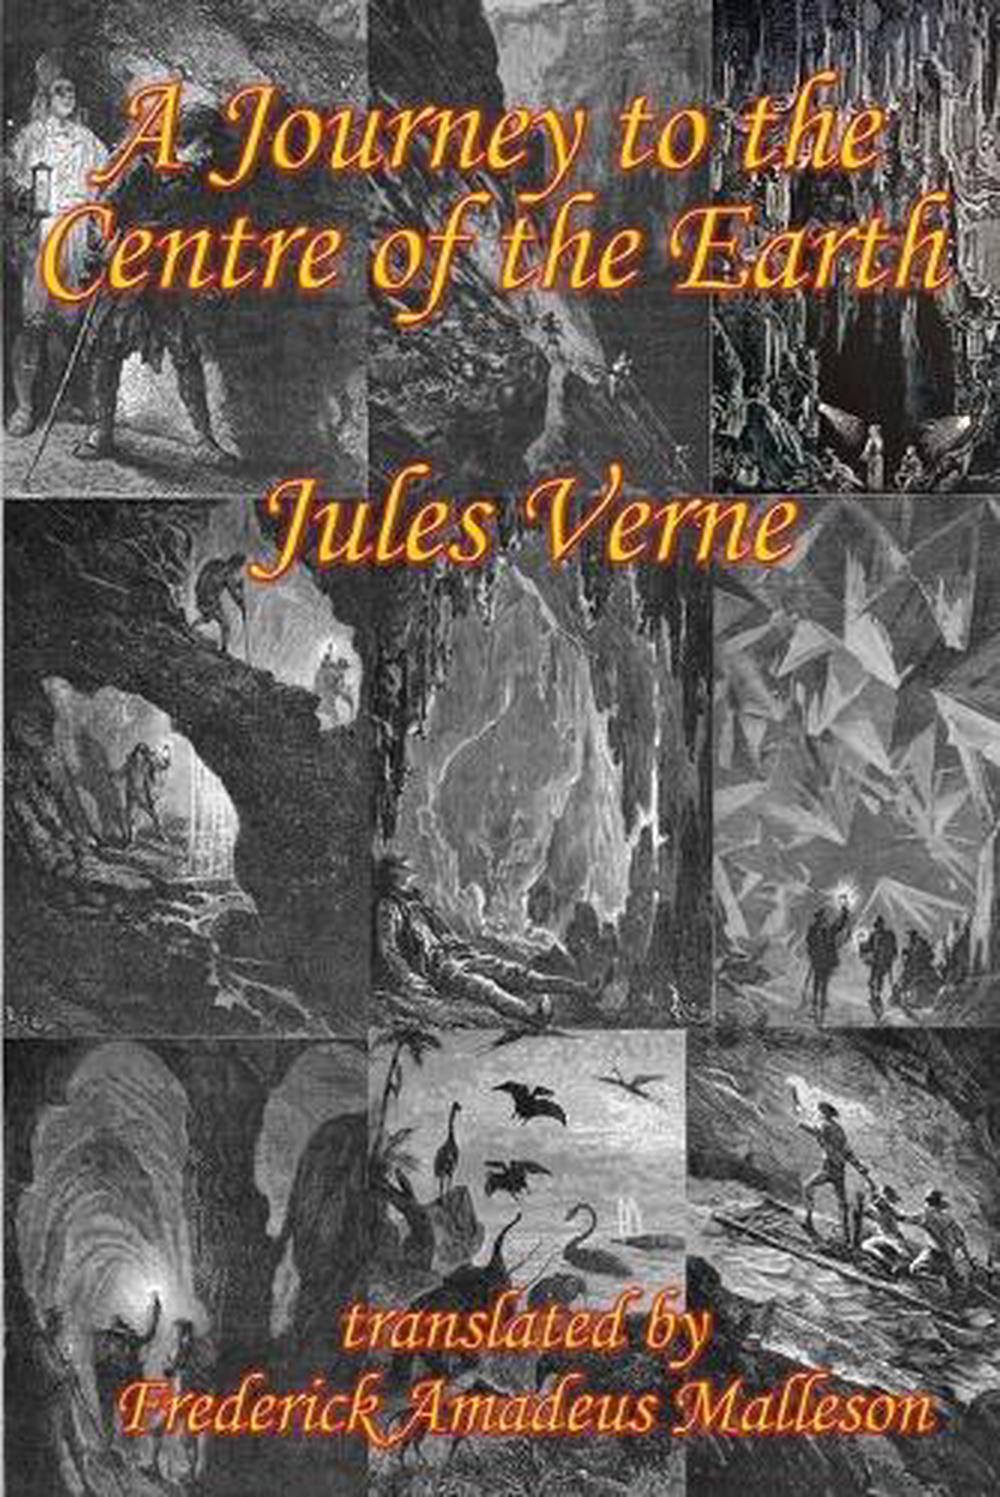 jules verne journey to the center of the earth